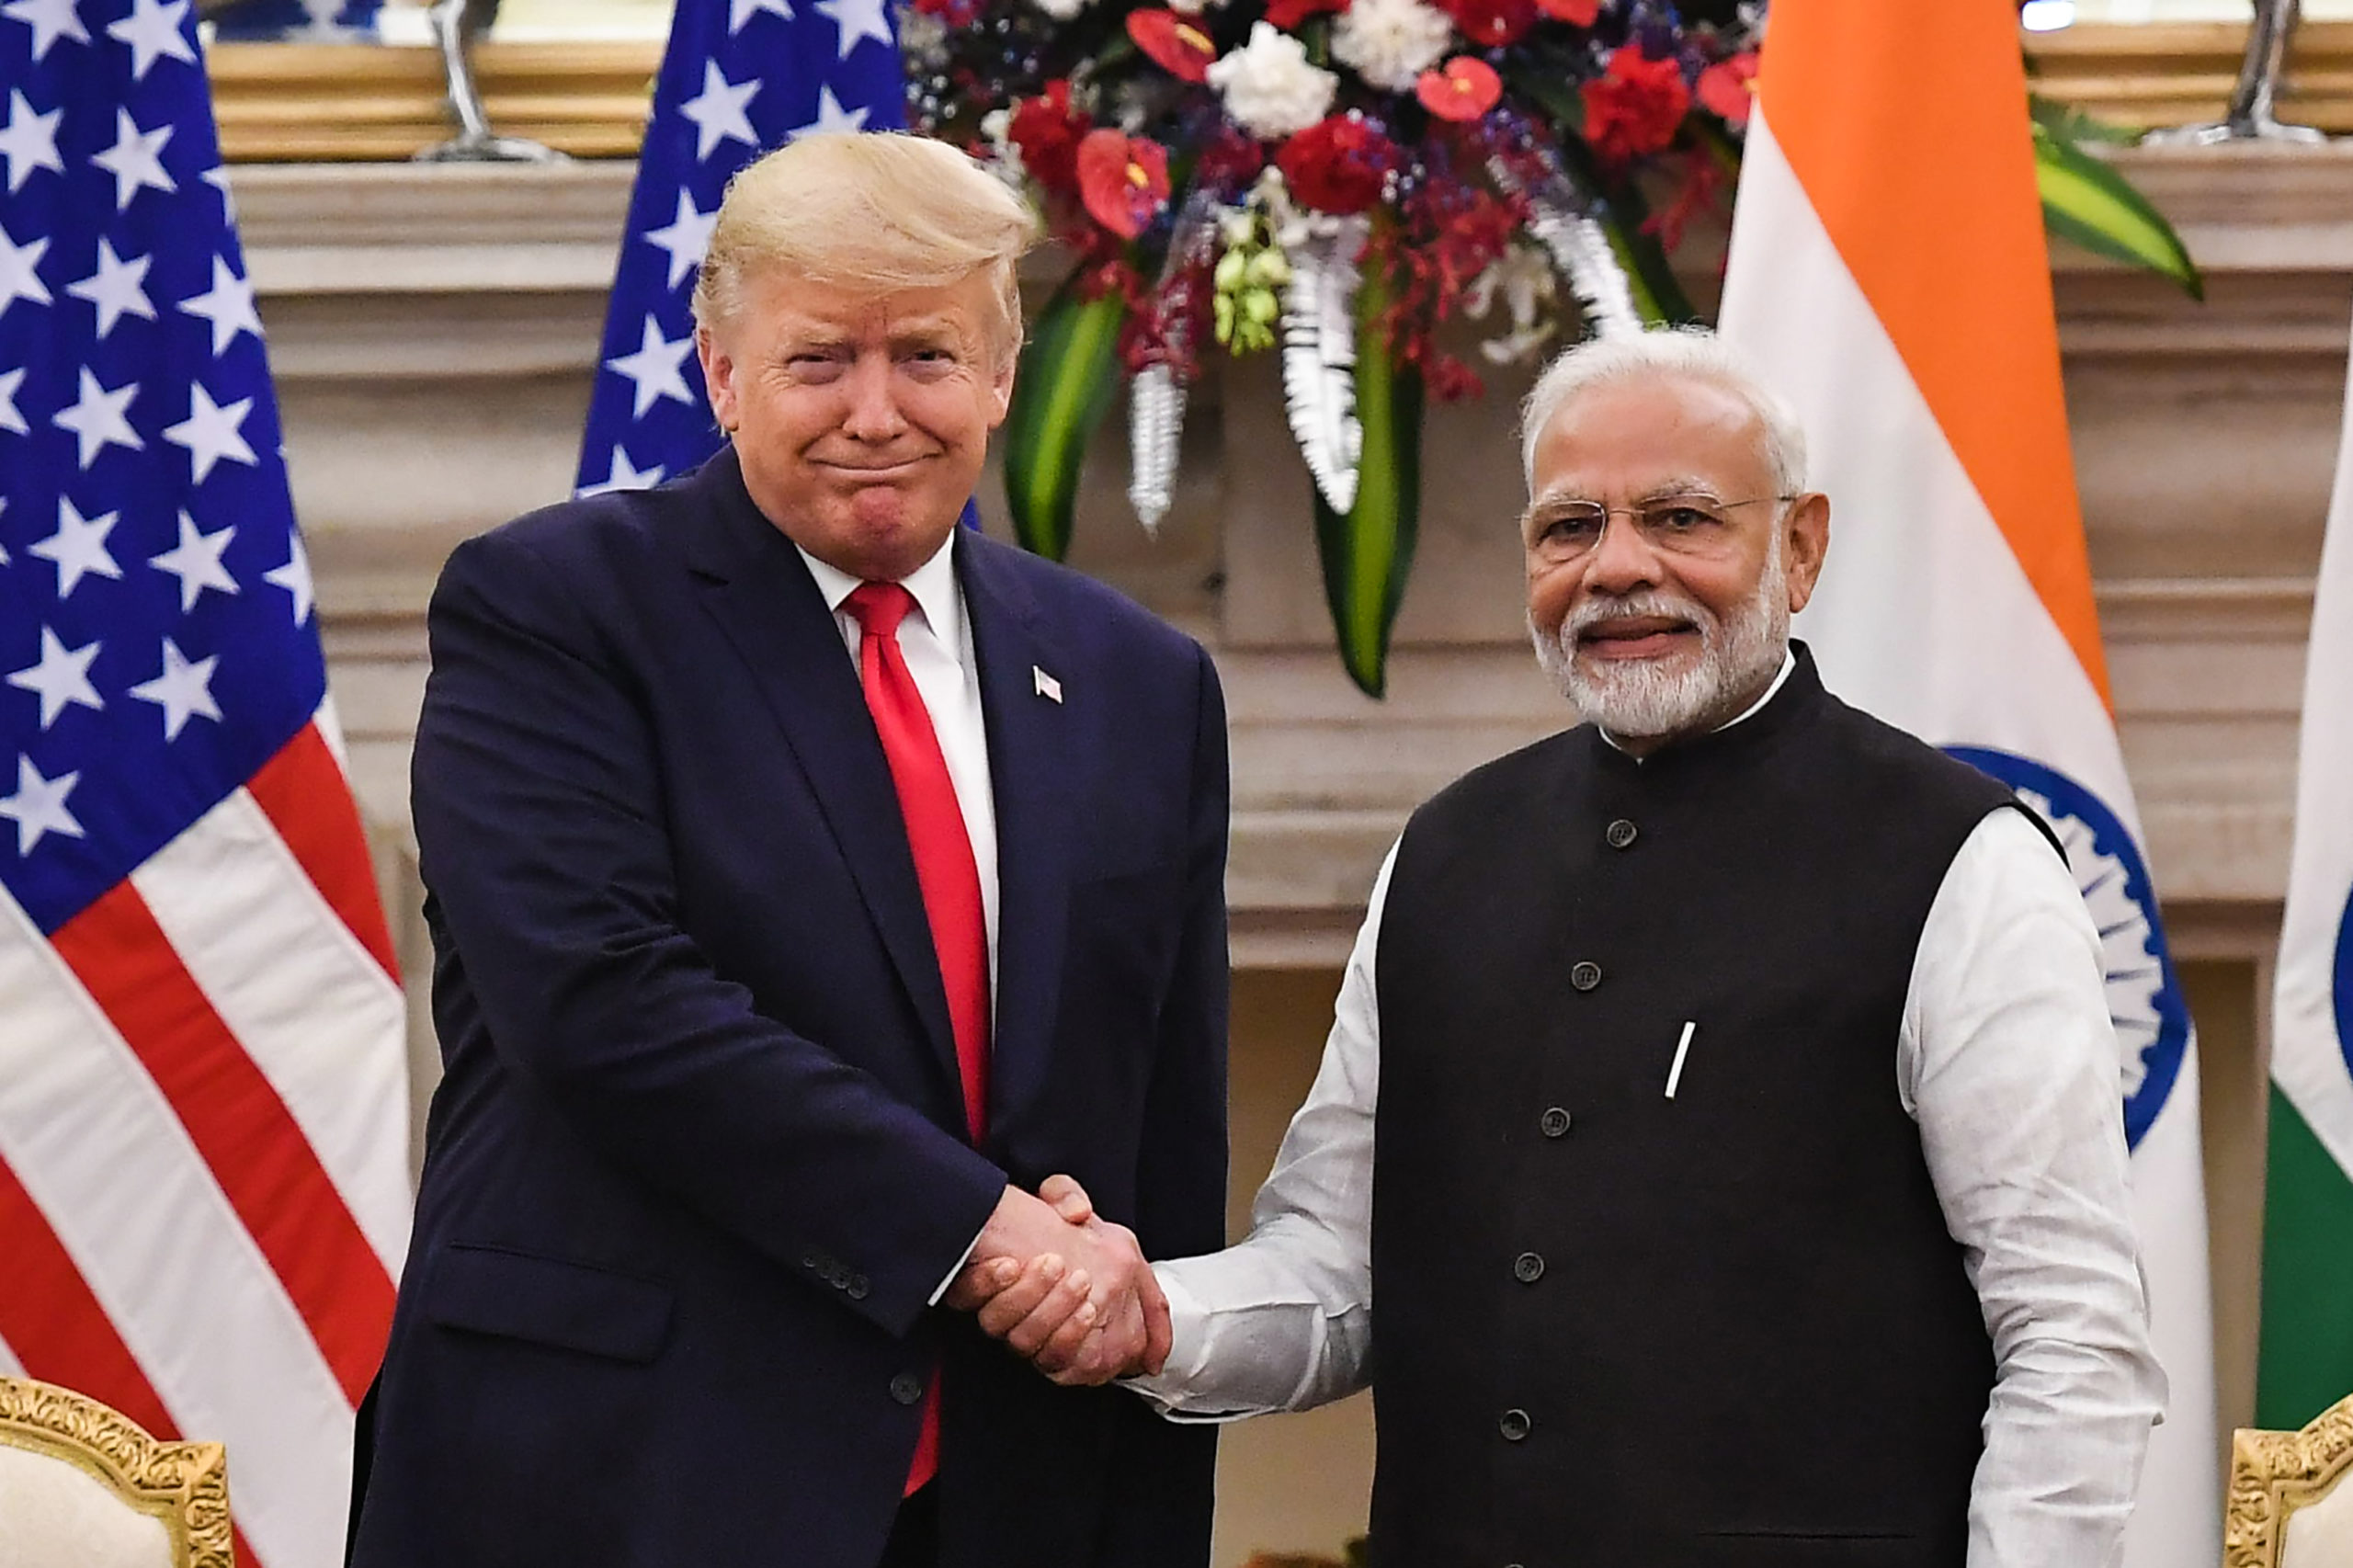 India's Prime Minister Narendra Modi (R) shakes hands with US President Donald Trump before a meeting at Hyderabad House in New Delhi on February 25, 2020. (Photo by Mandel NGAN / AFP) (Photo by MANDEL NGAN/AFP via Getty Images)